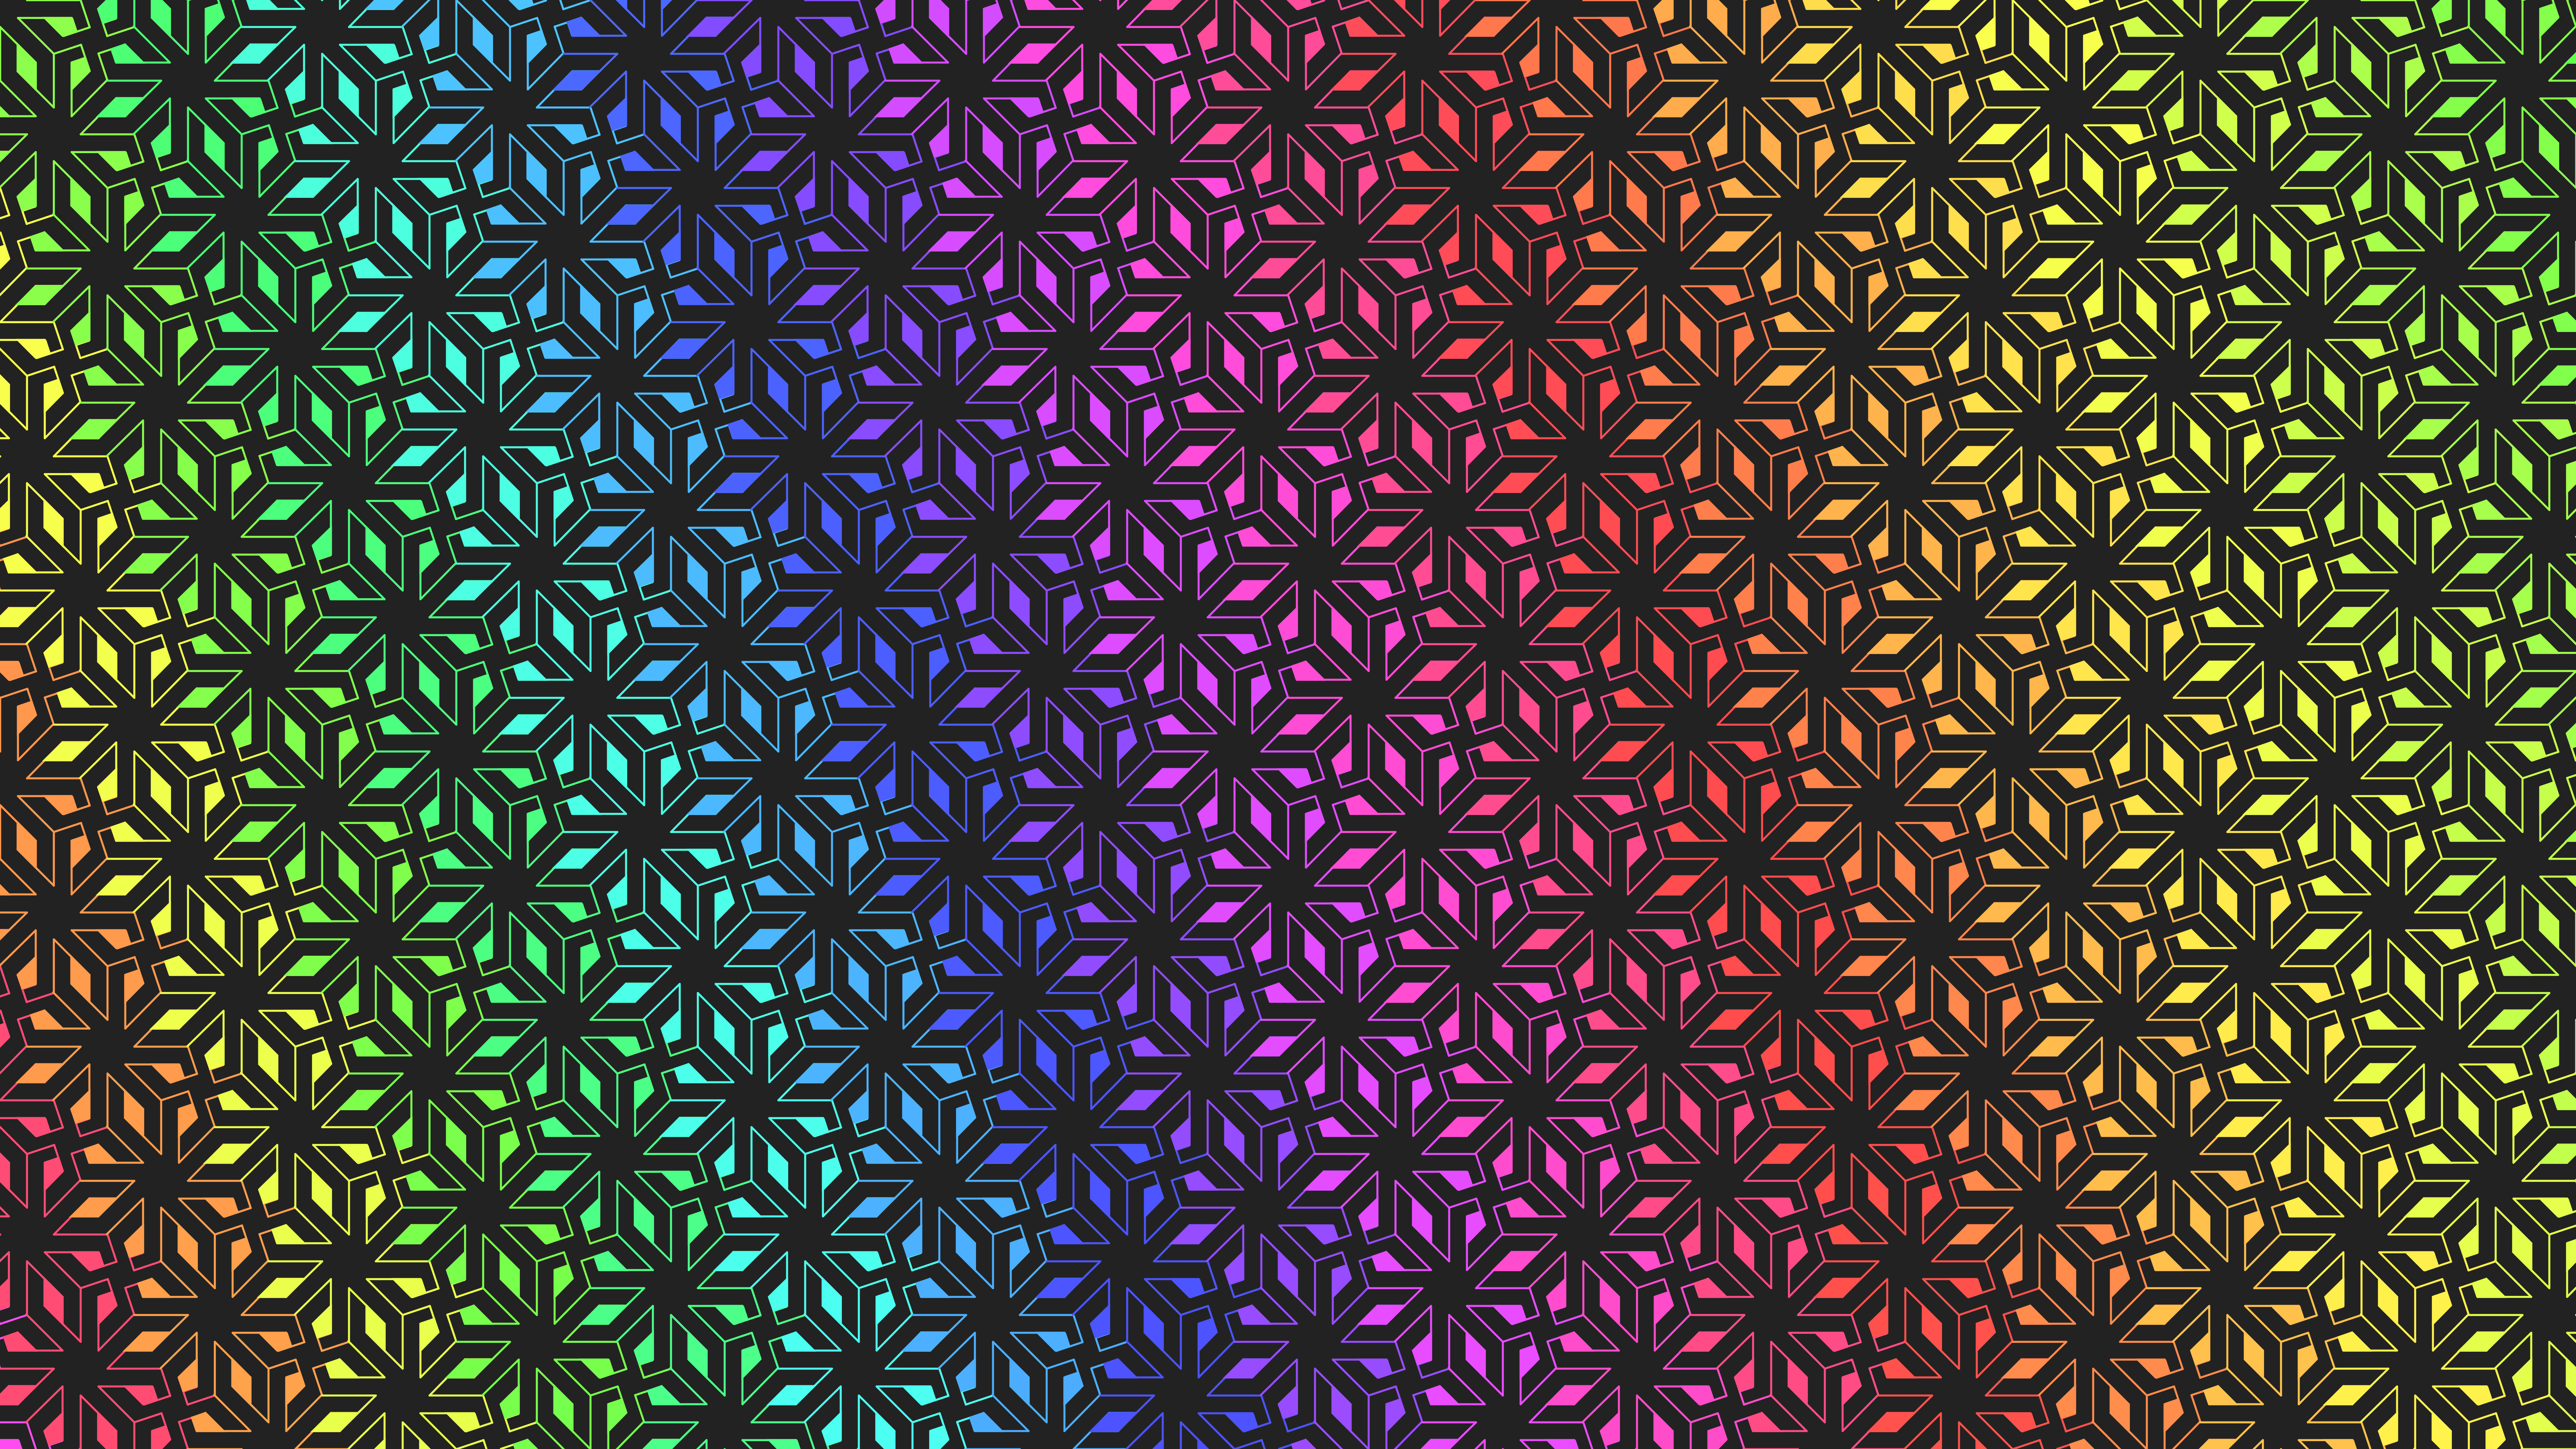 General 7680x4320 abstract pattern colorful